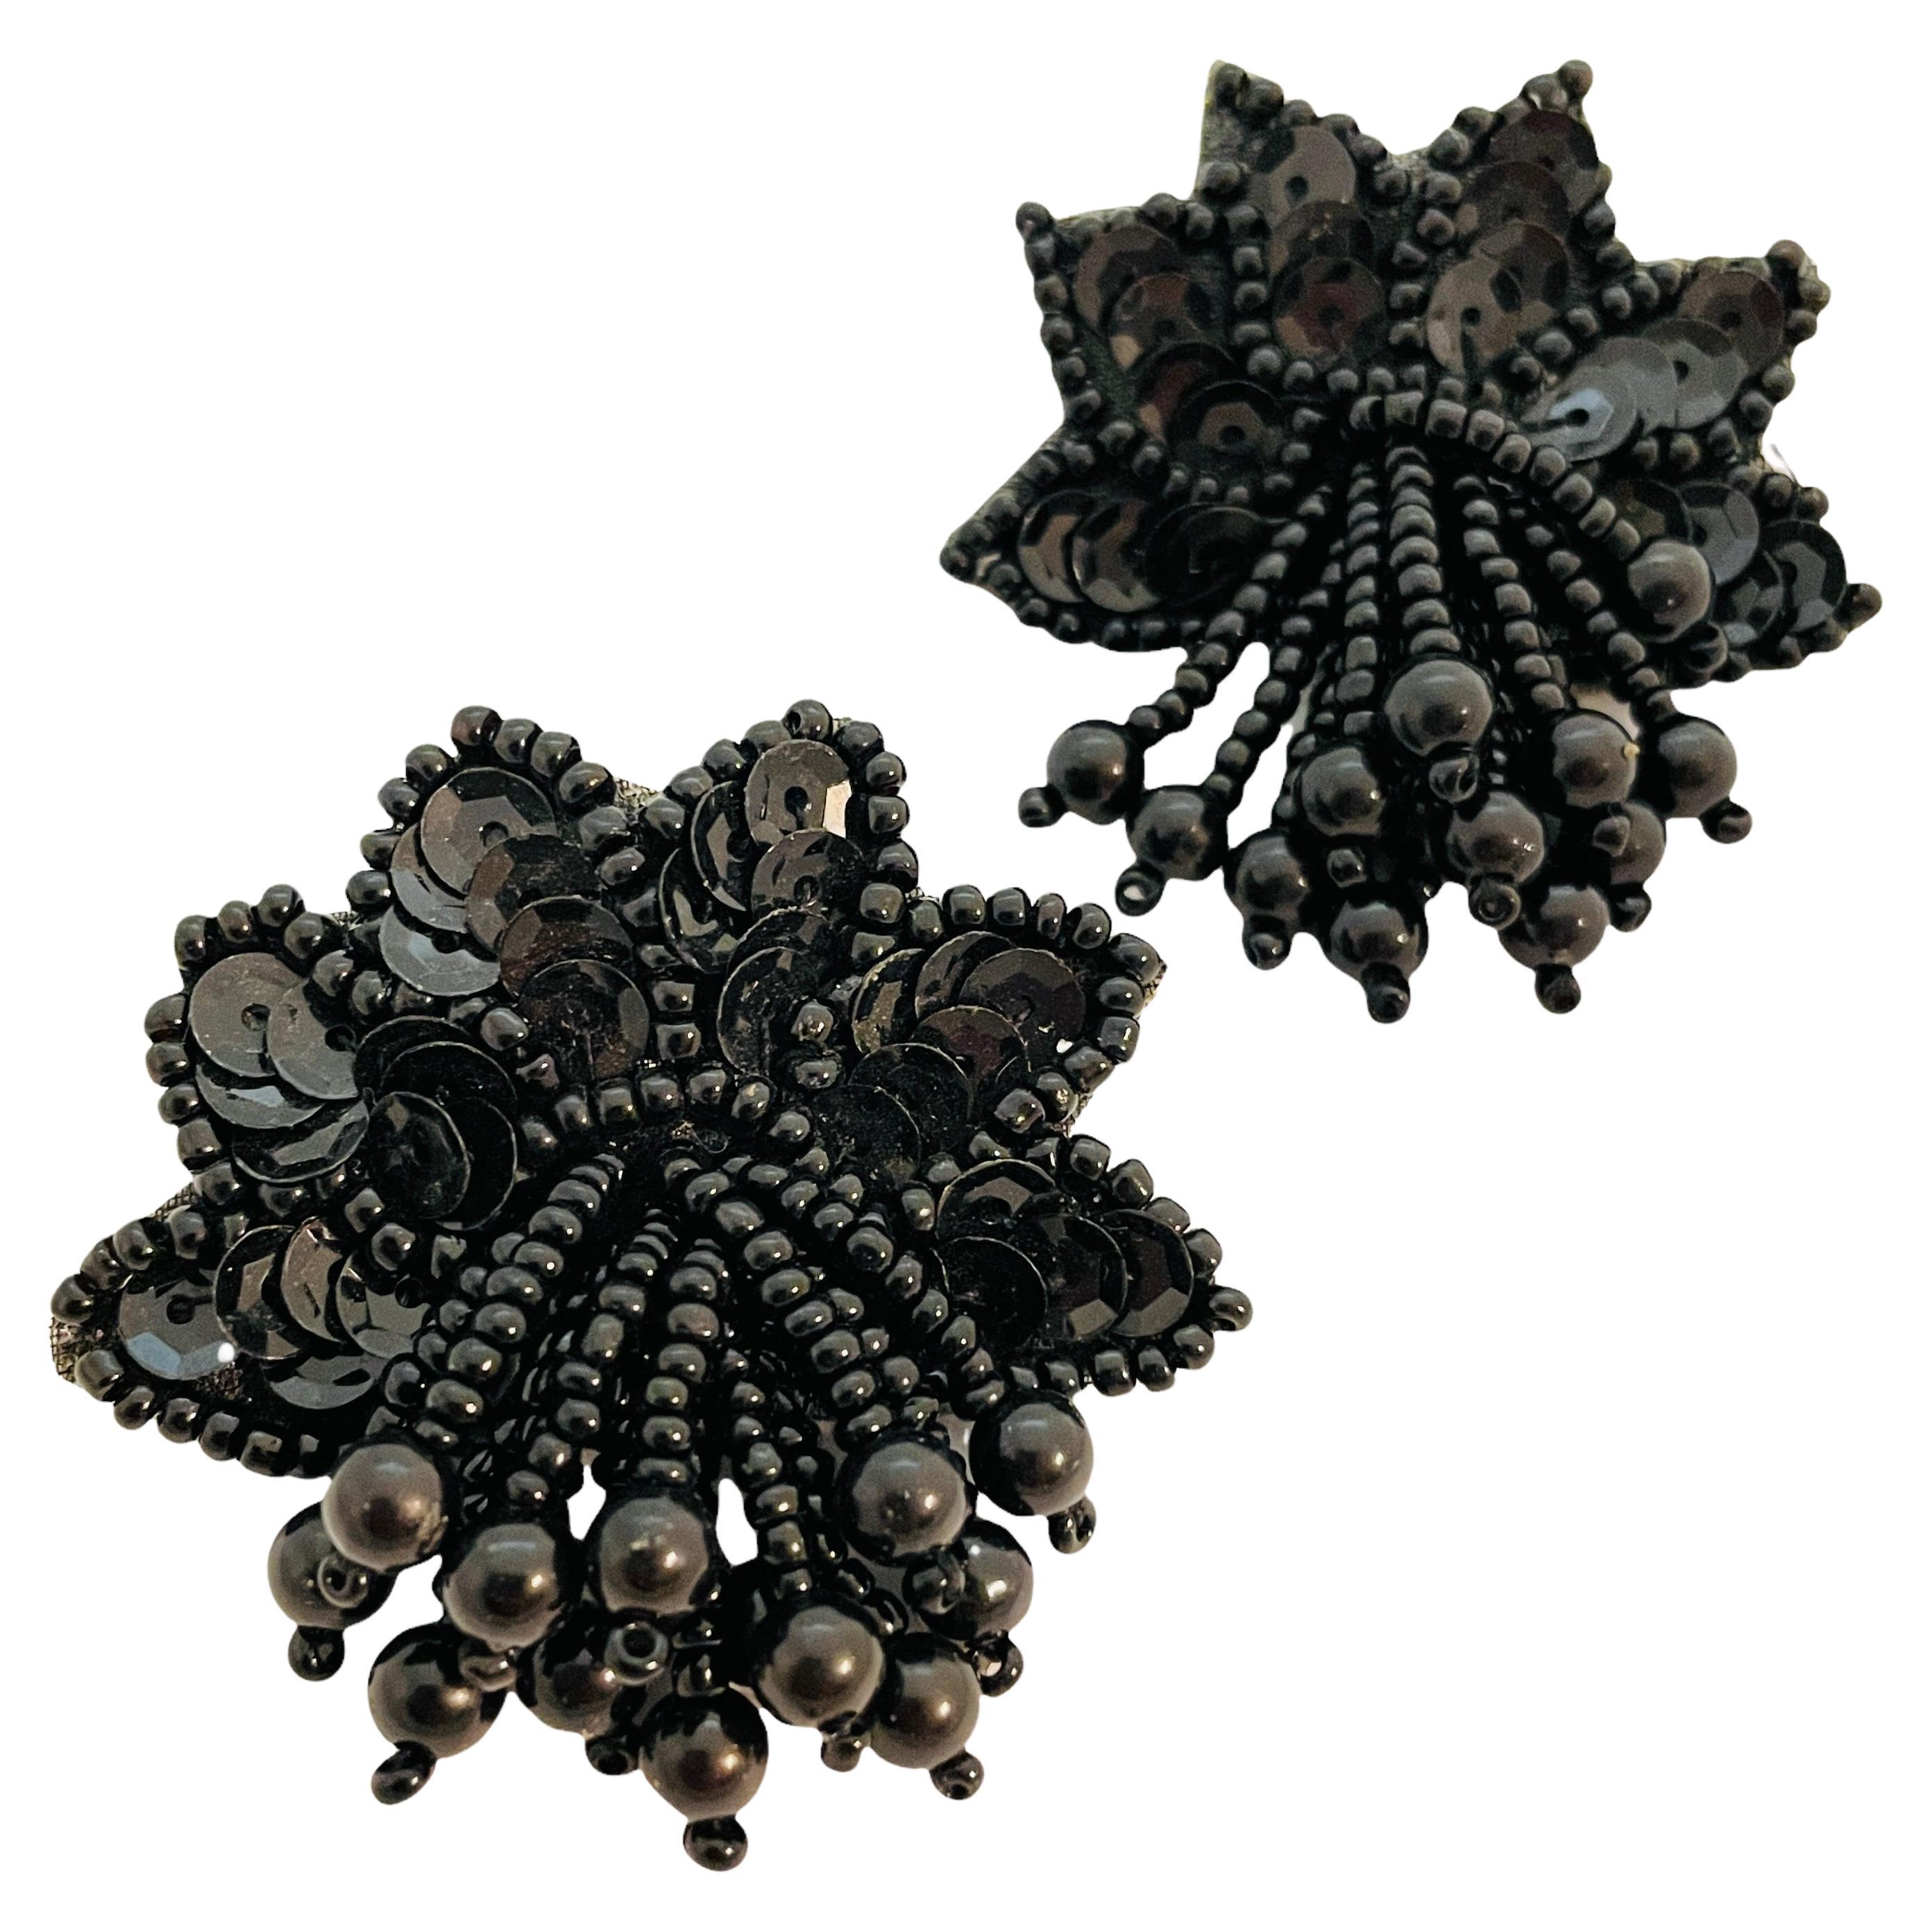 Vintage black seed beads artisan hand made earrings For Sale